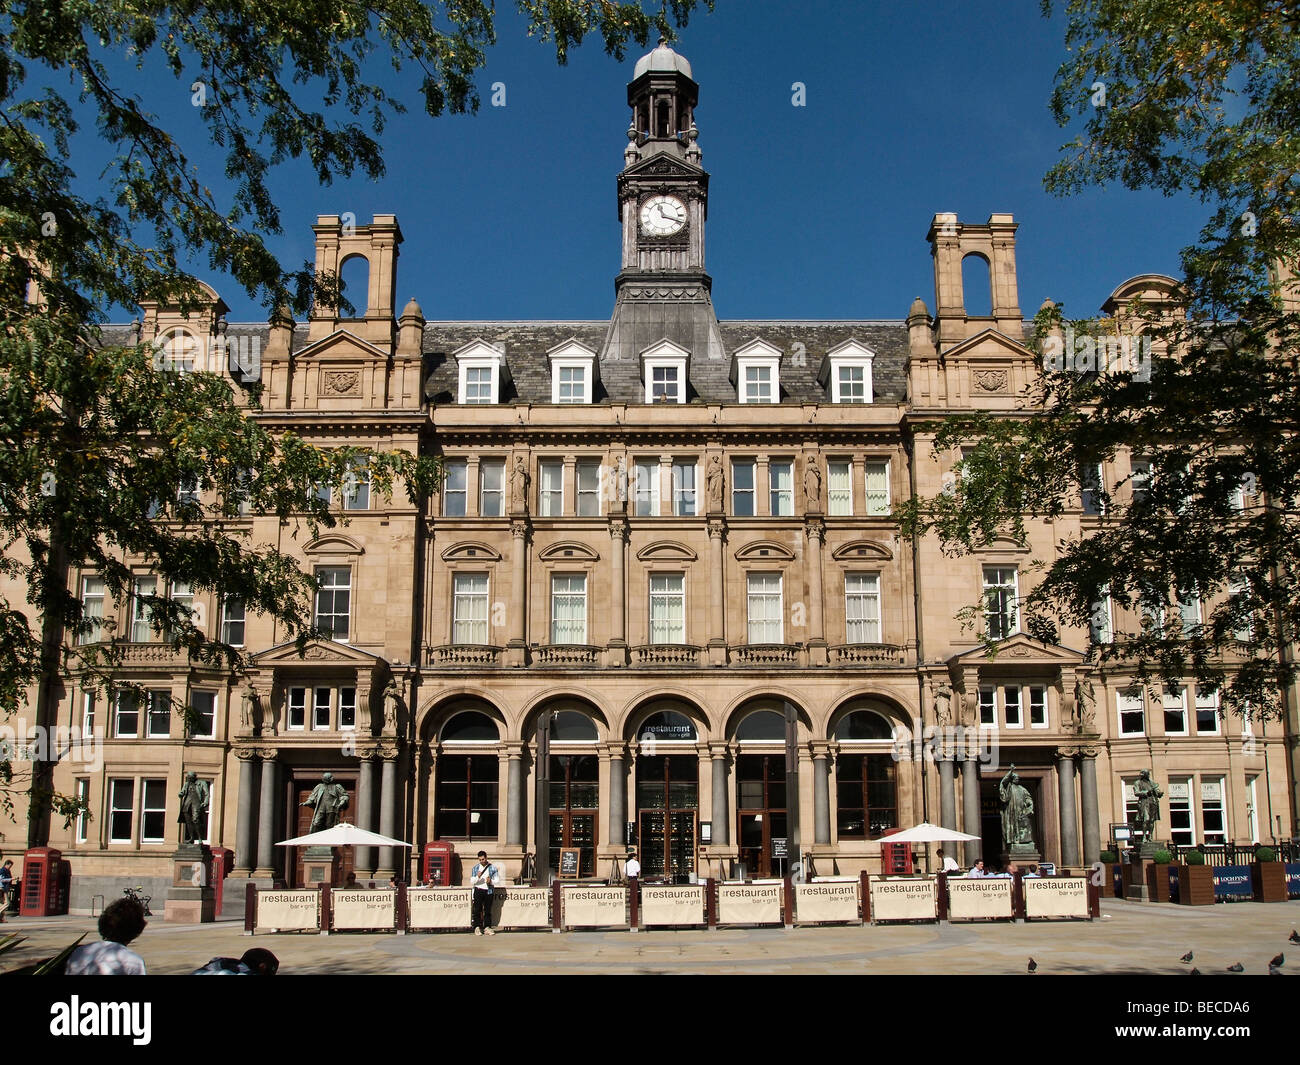 Old Post Office converted to Restaurants and Apartments in City Square Leeds UK Stock Photo